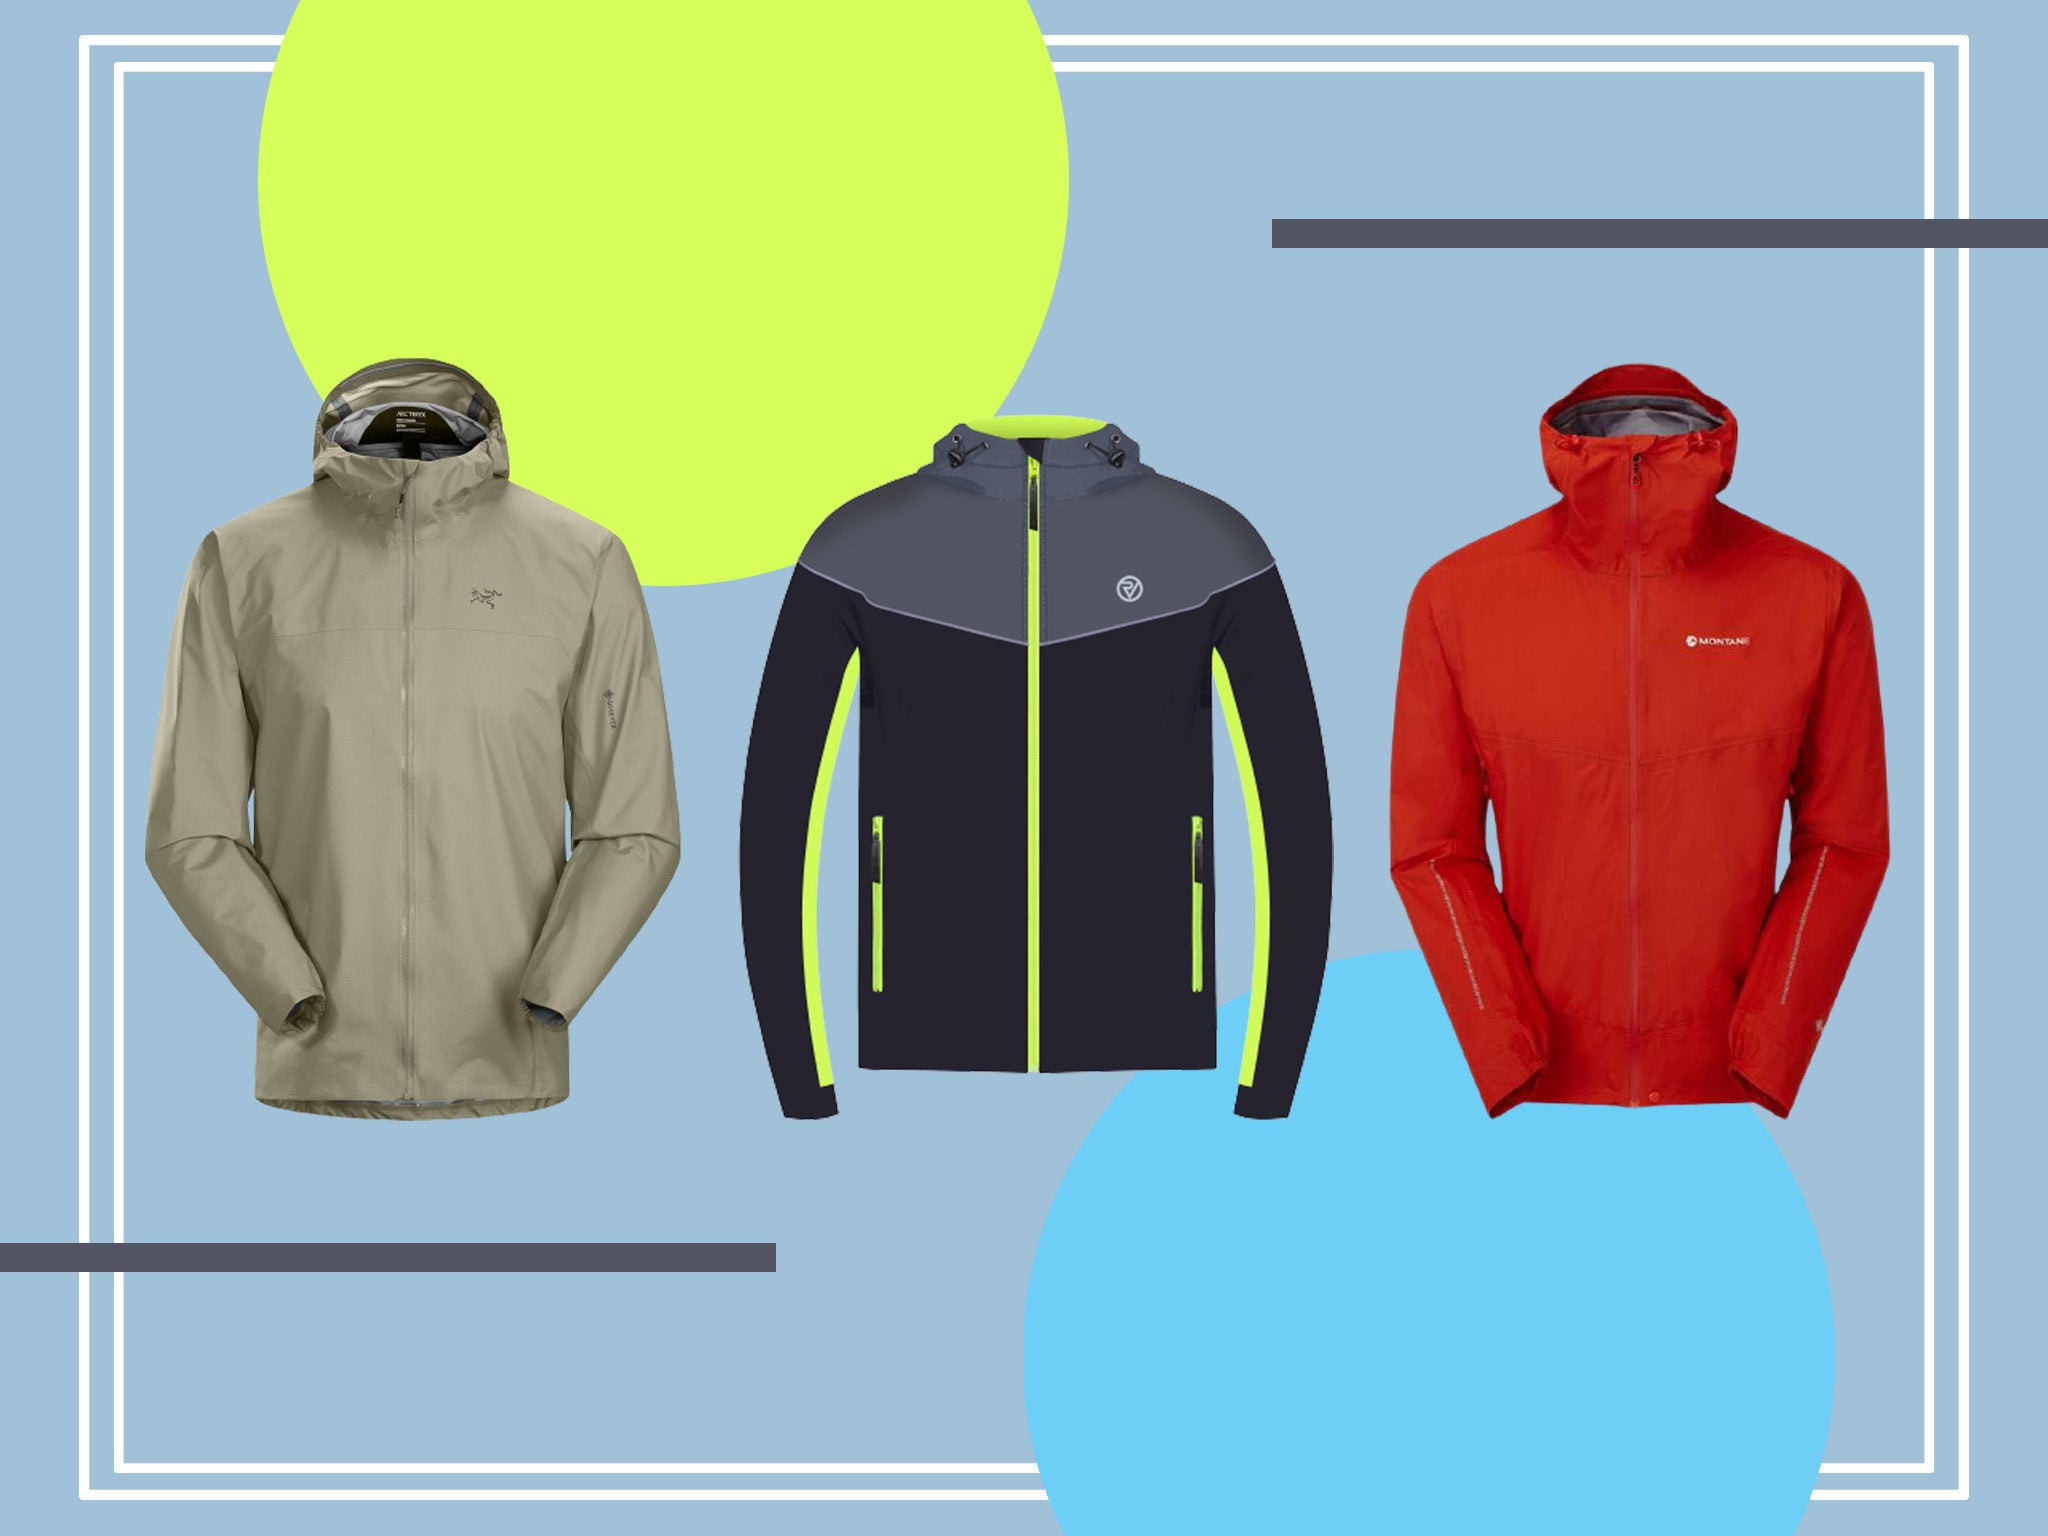 How to choose a running jacket